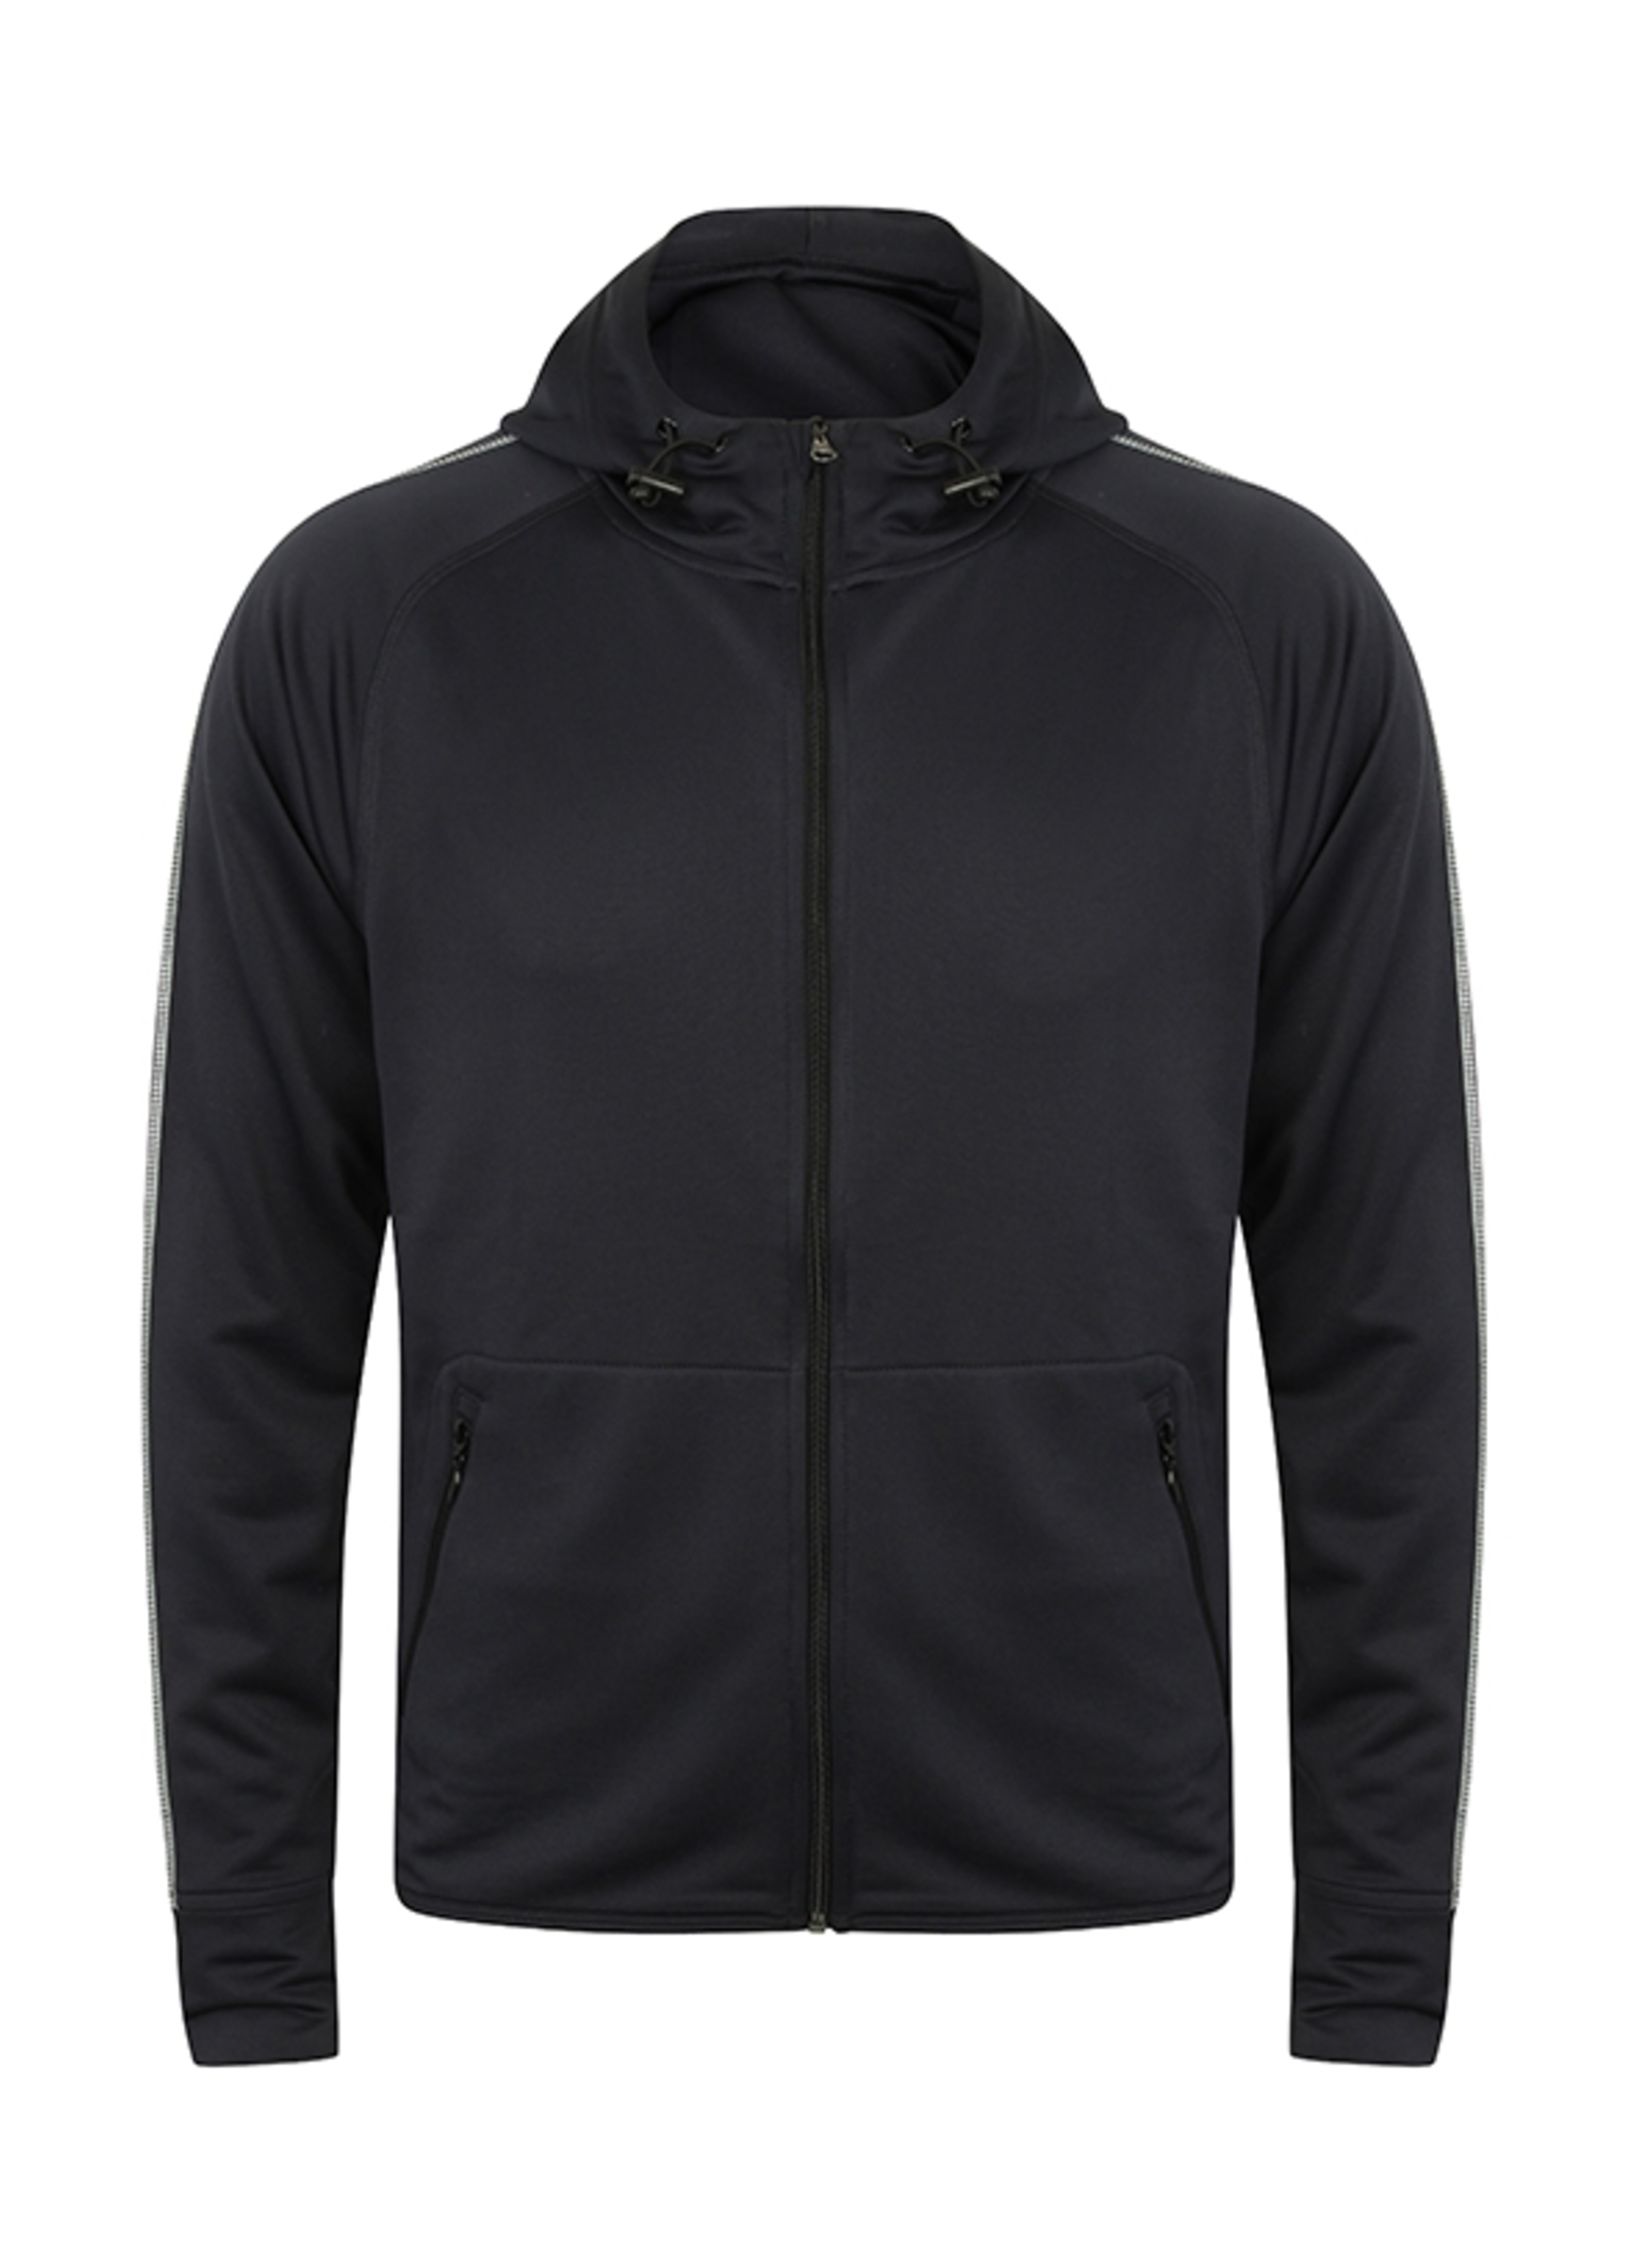 Tombo Men's Hoodie with Reflective Tape